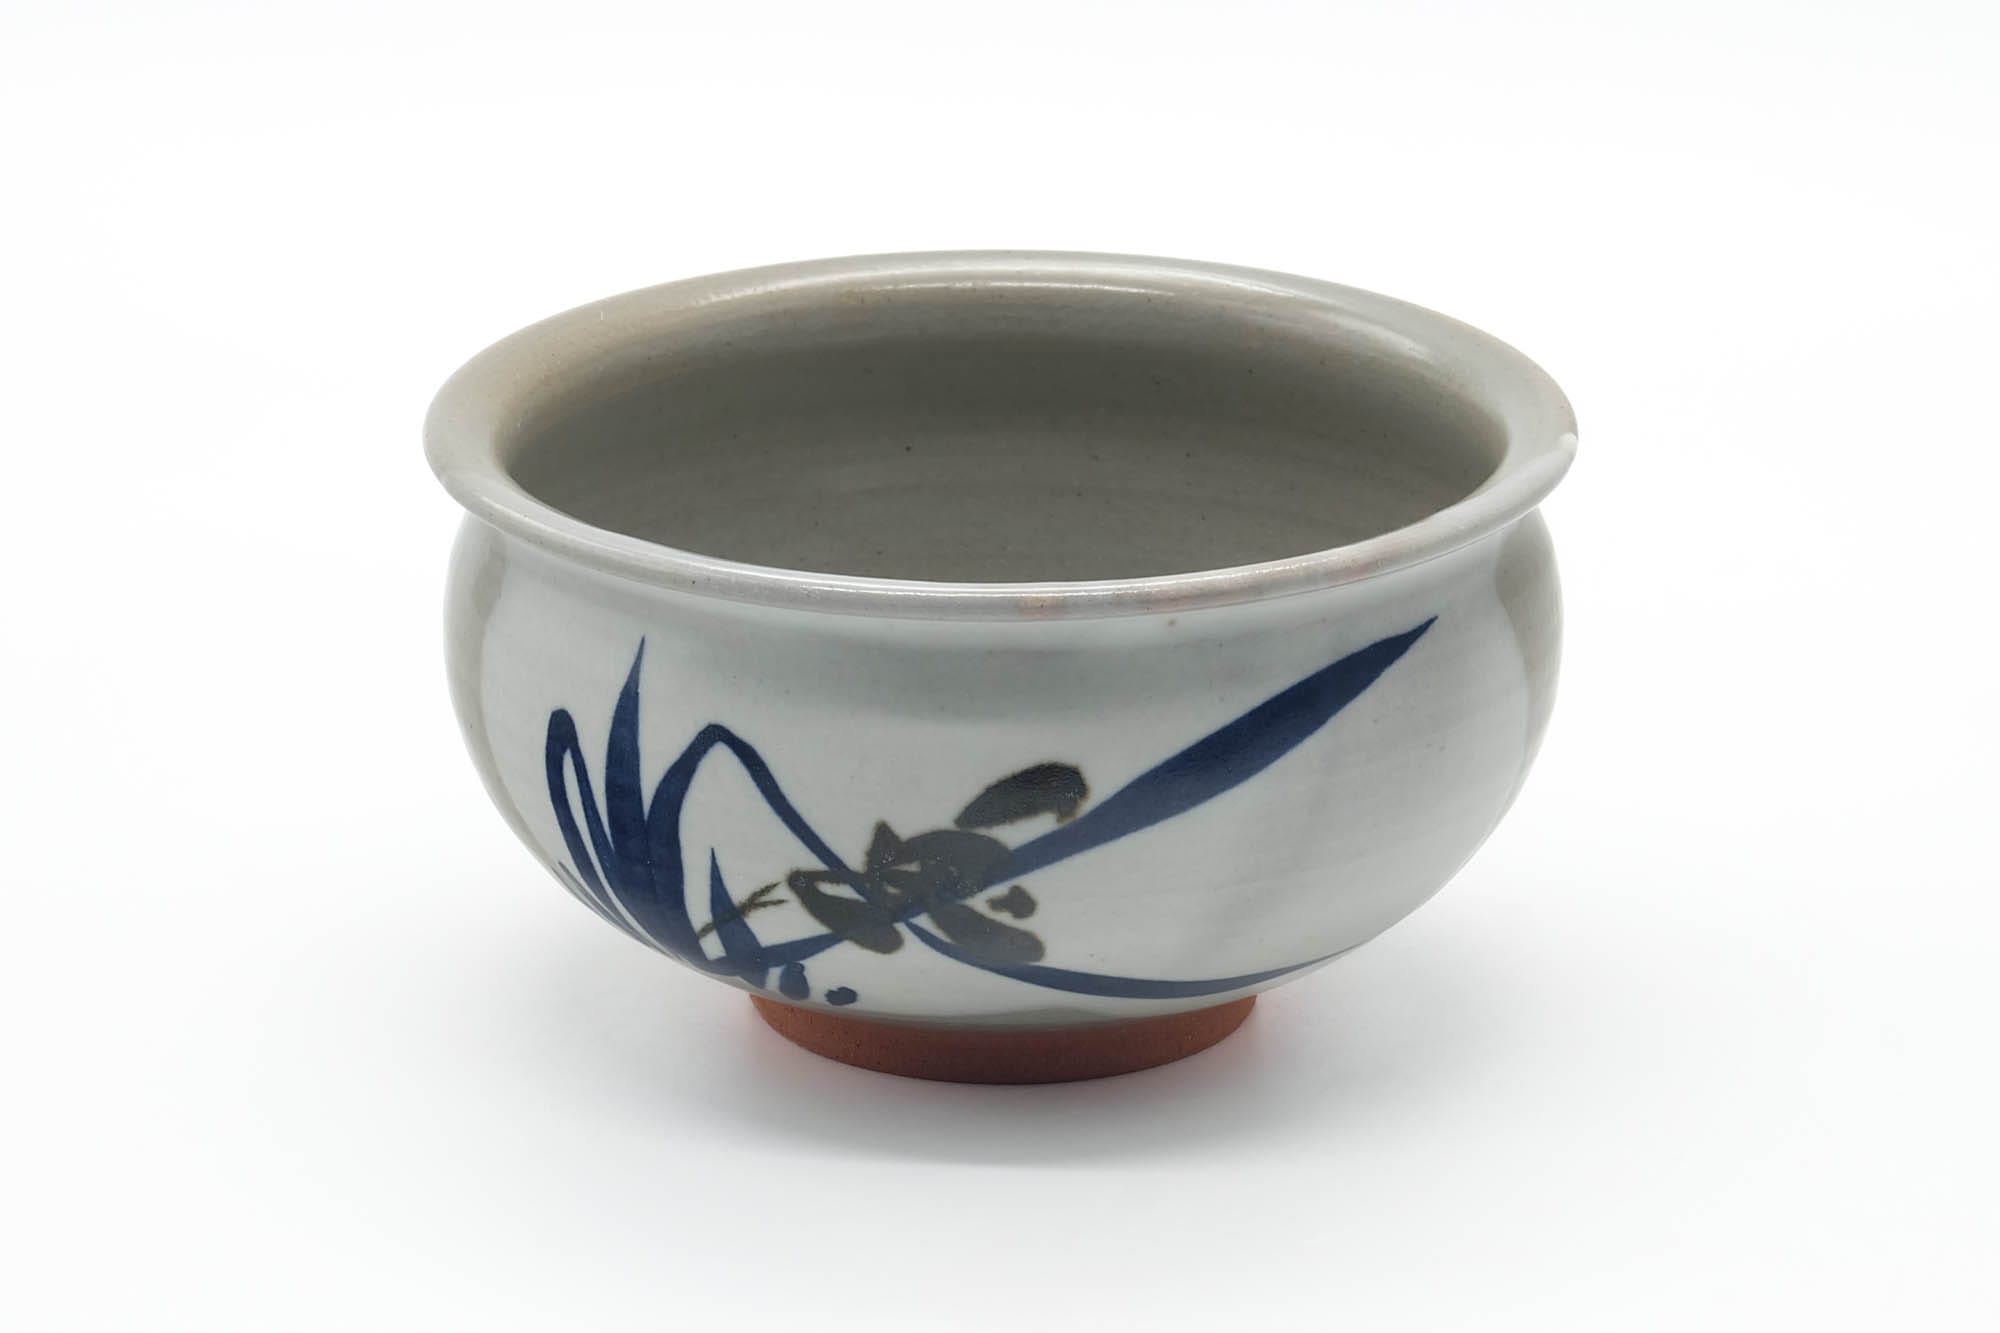 Japanese Kensui - Abstract Grey Glazed Water Bowl - 615ml